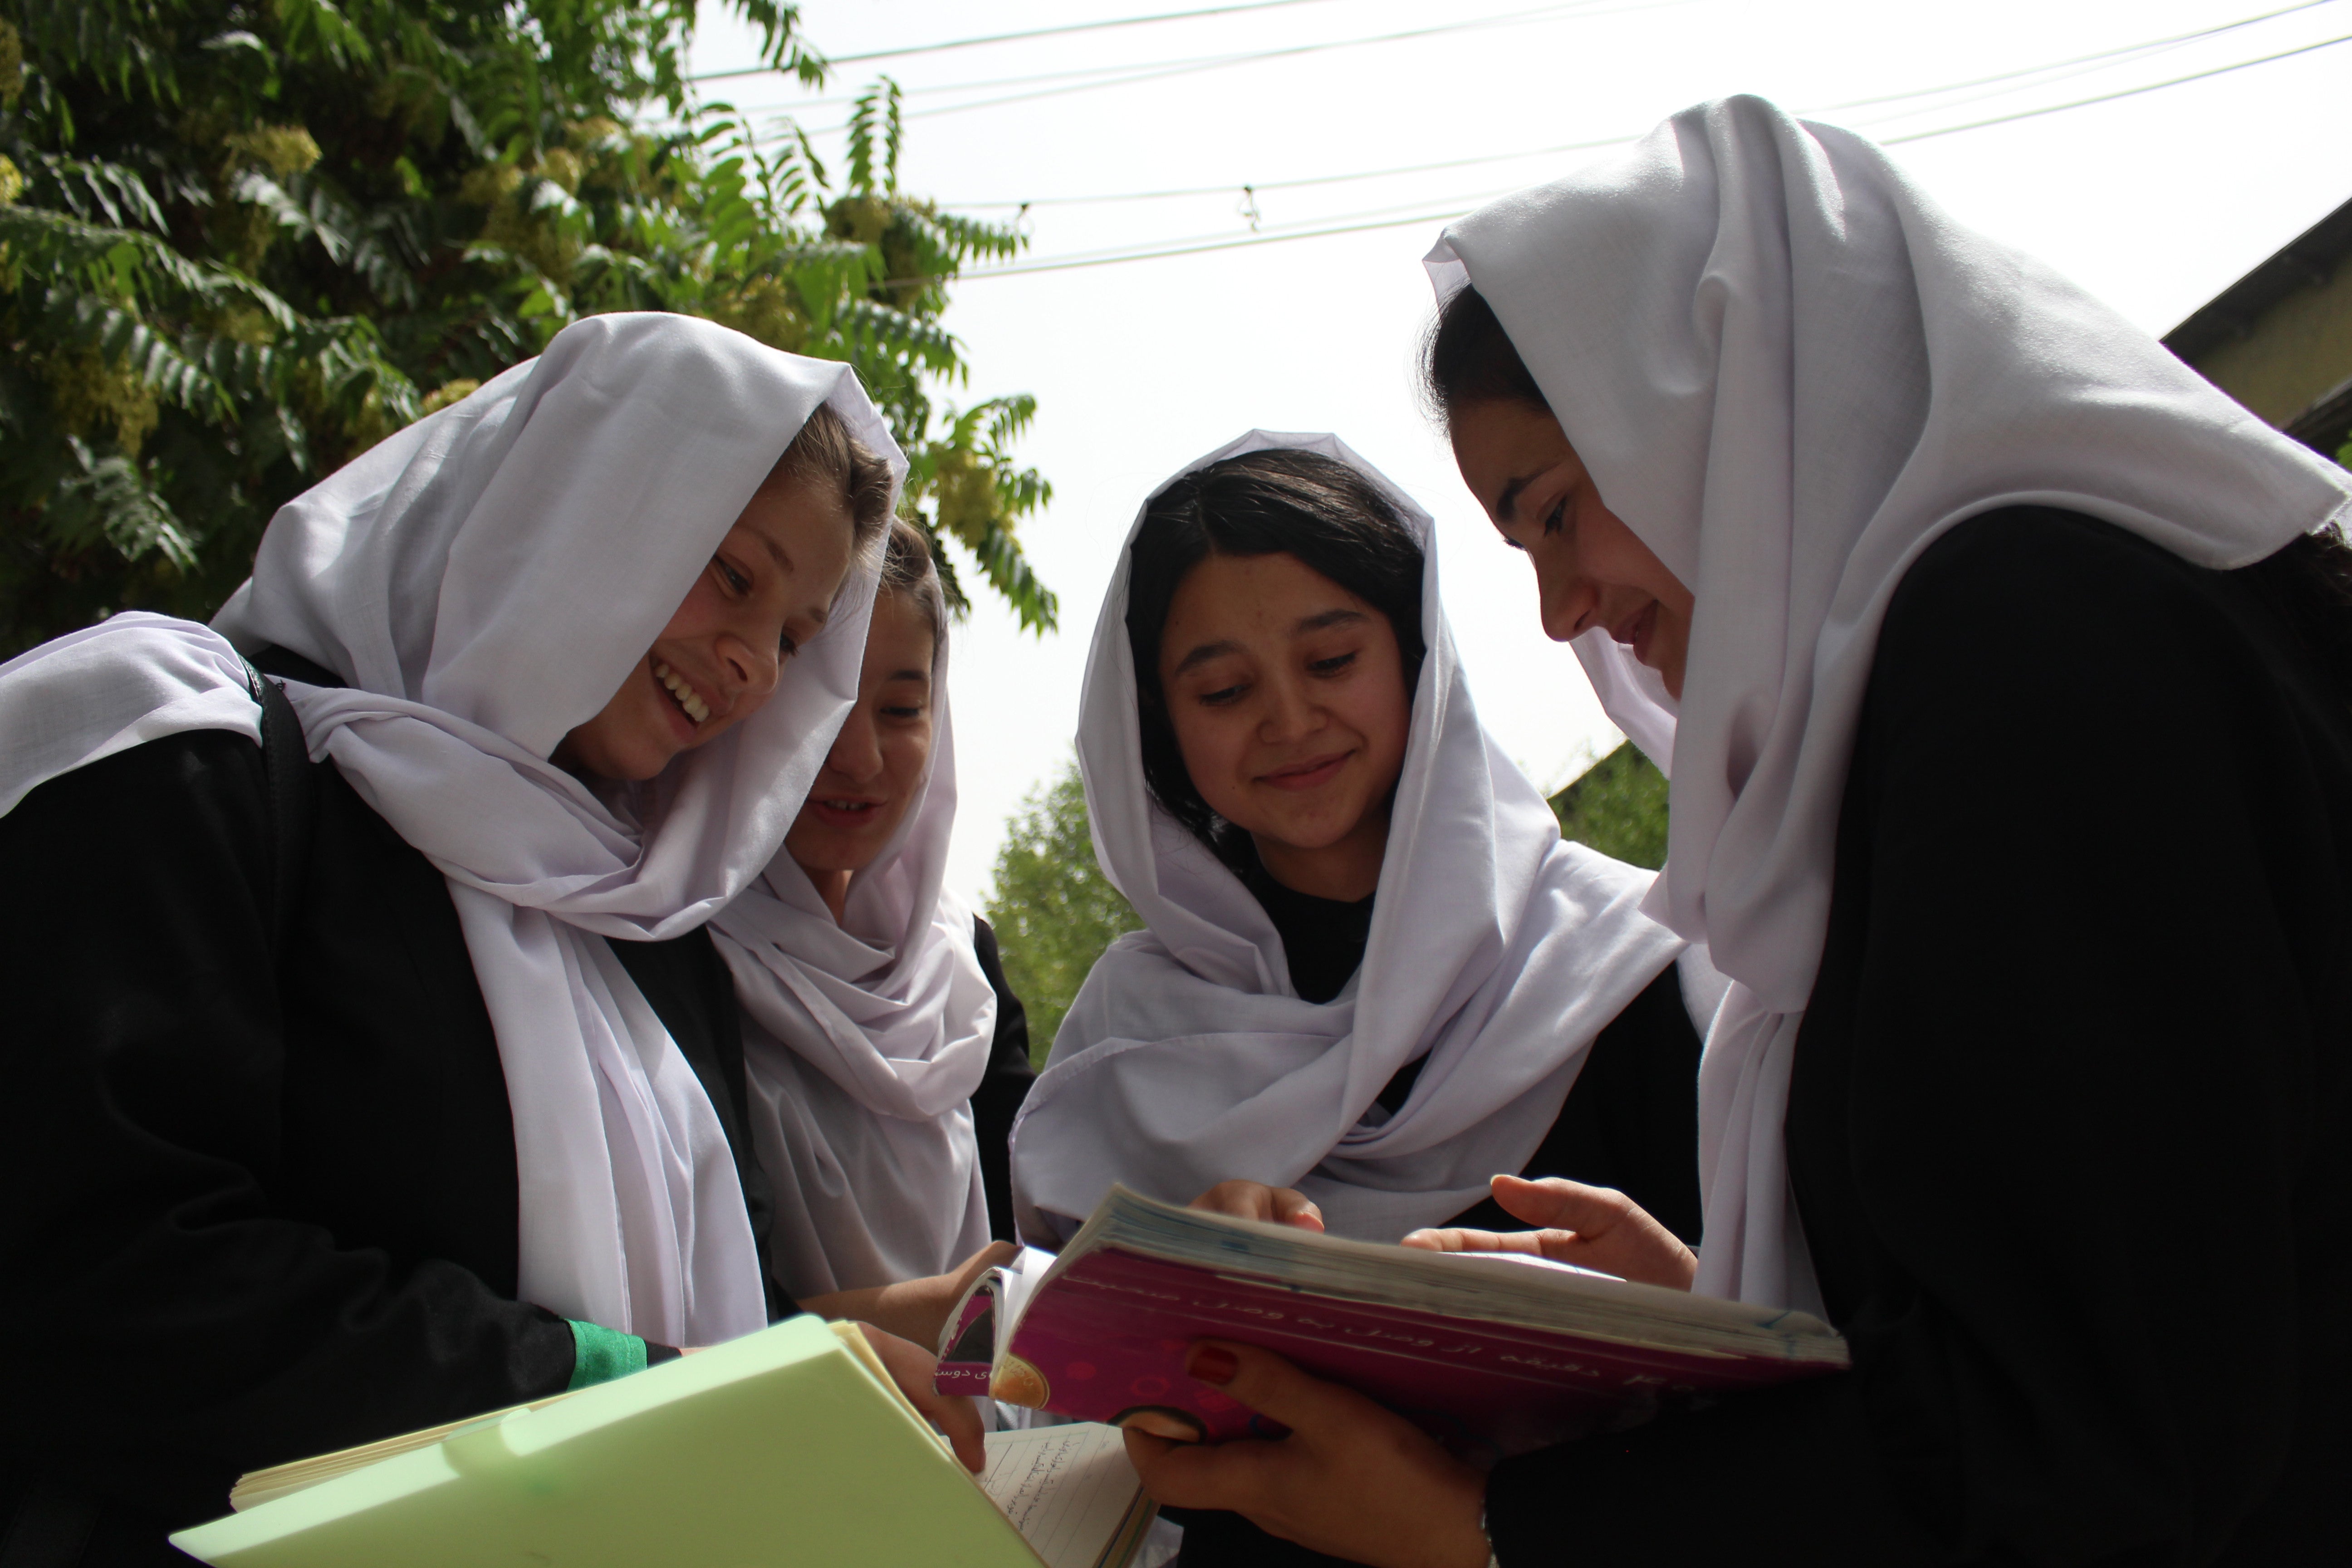 Members of the Best Friends Group at Zarghoona High School, from left: Belqees Niazi, 17, Behishta Amini, 18, and Safia Hussain, also 18, with an unidentified girl second from left